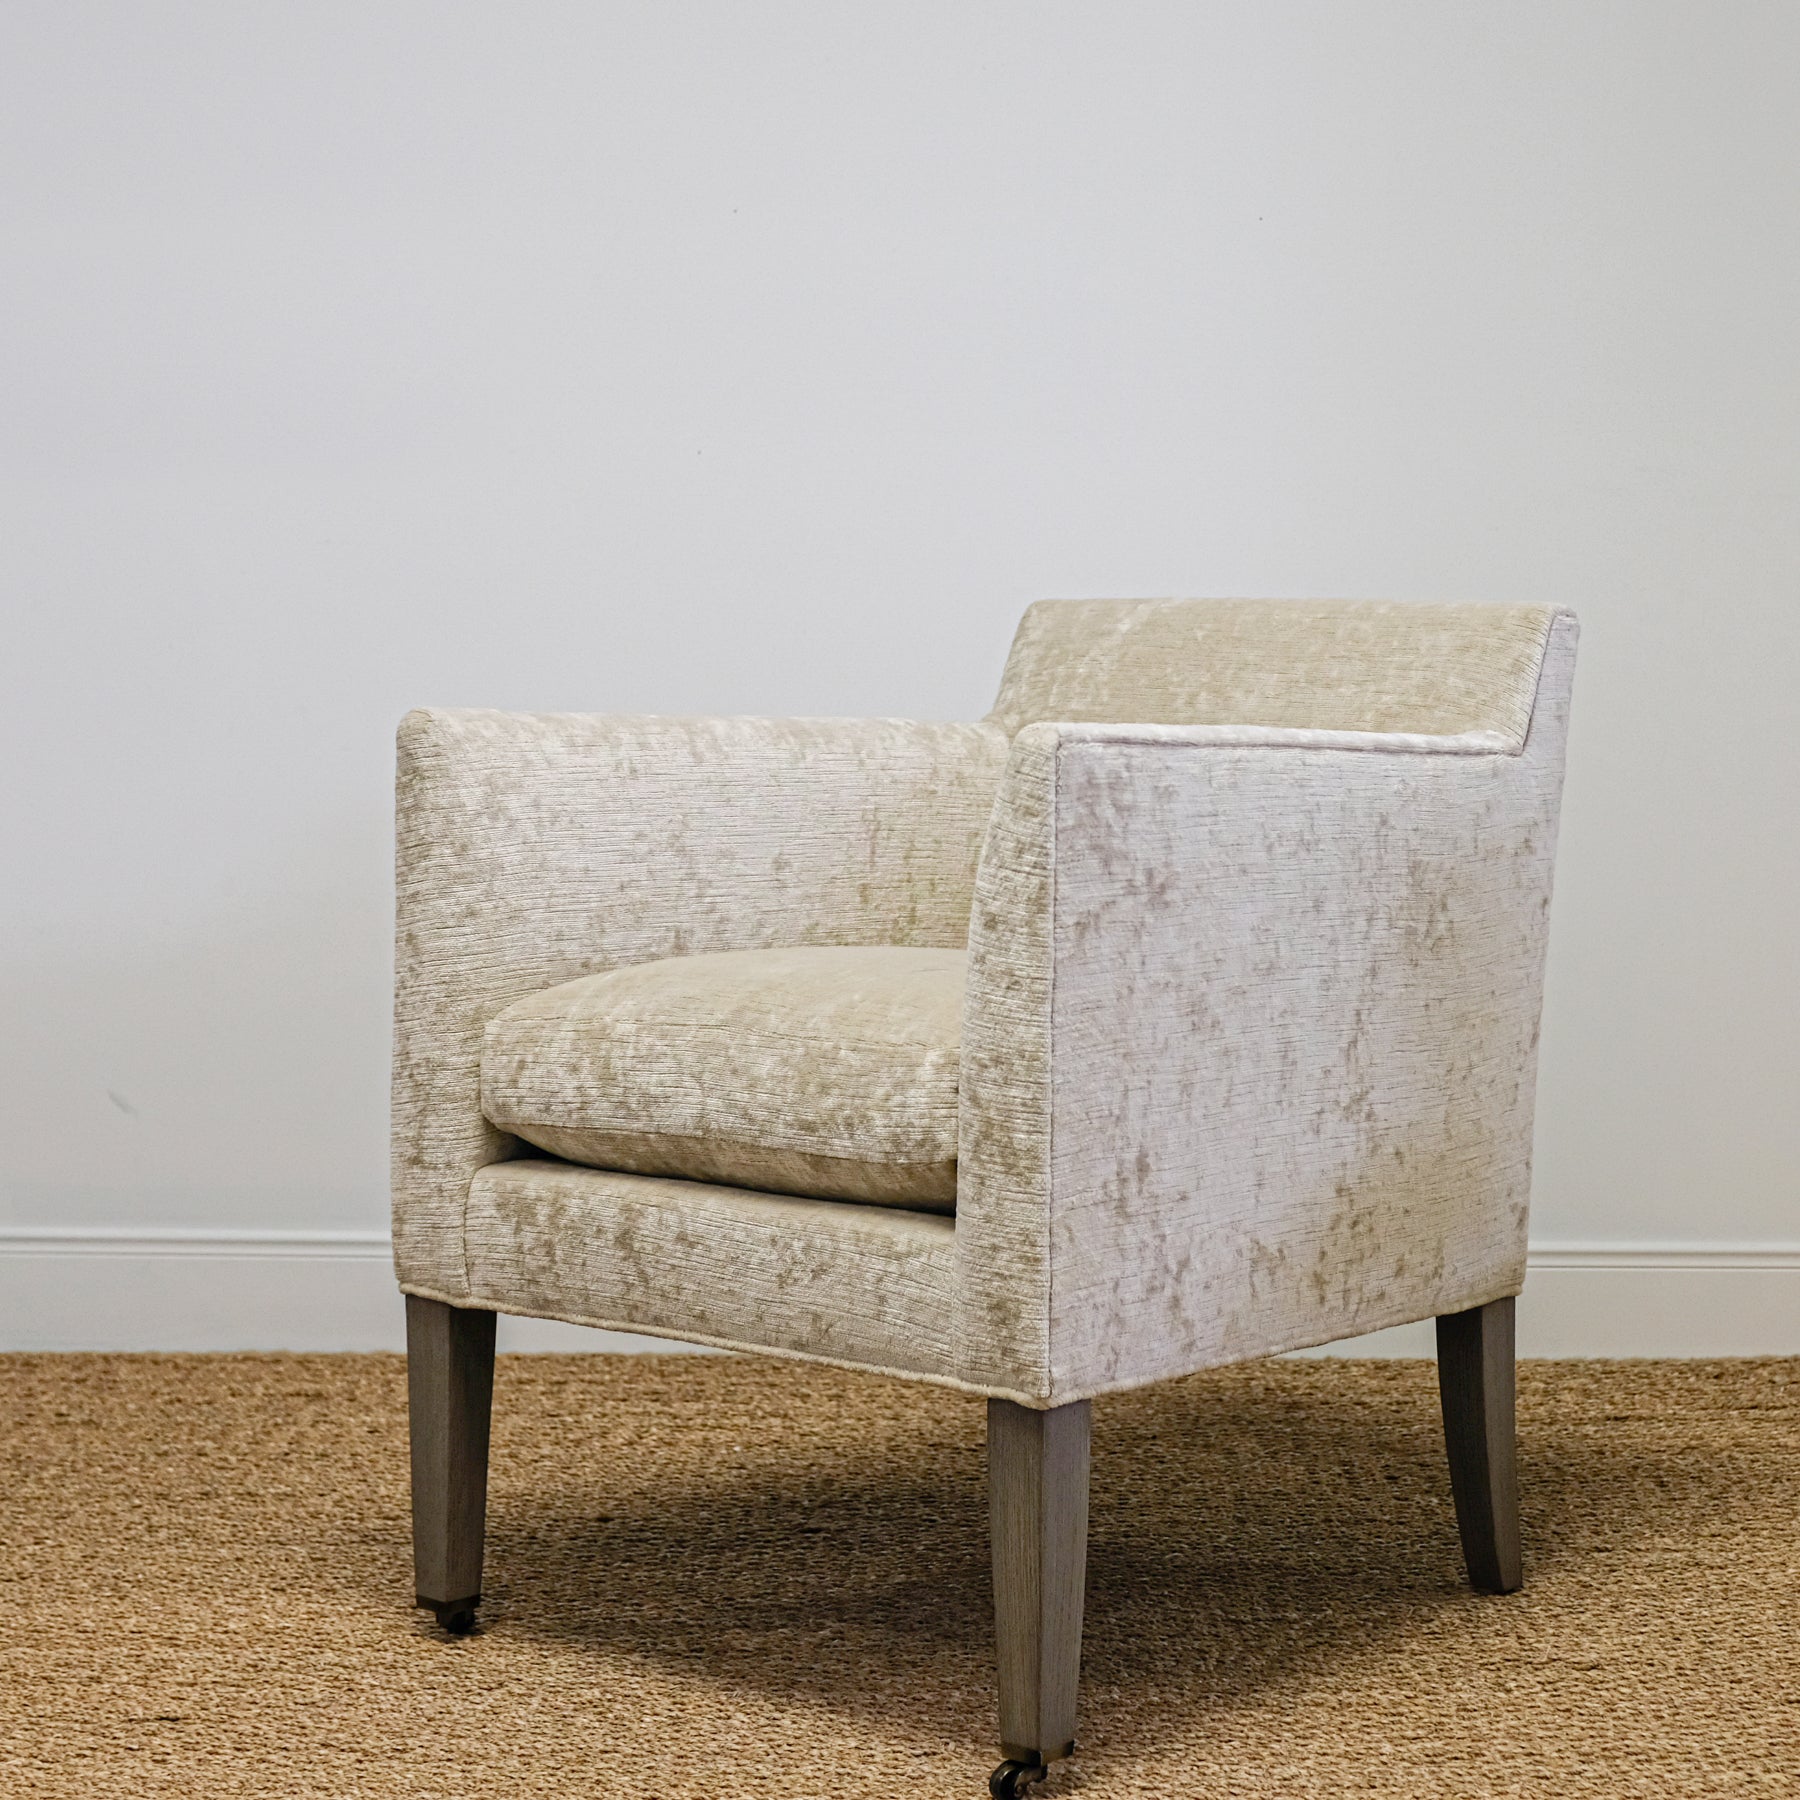 angled view of upholstered chair in mottled beige velvet with exposed wood leg, casters on front legs